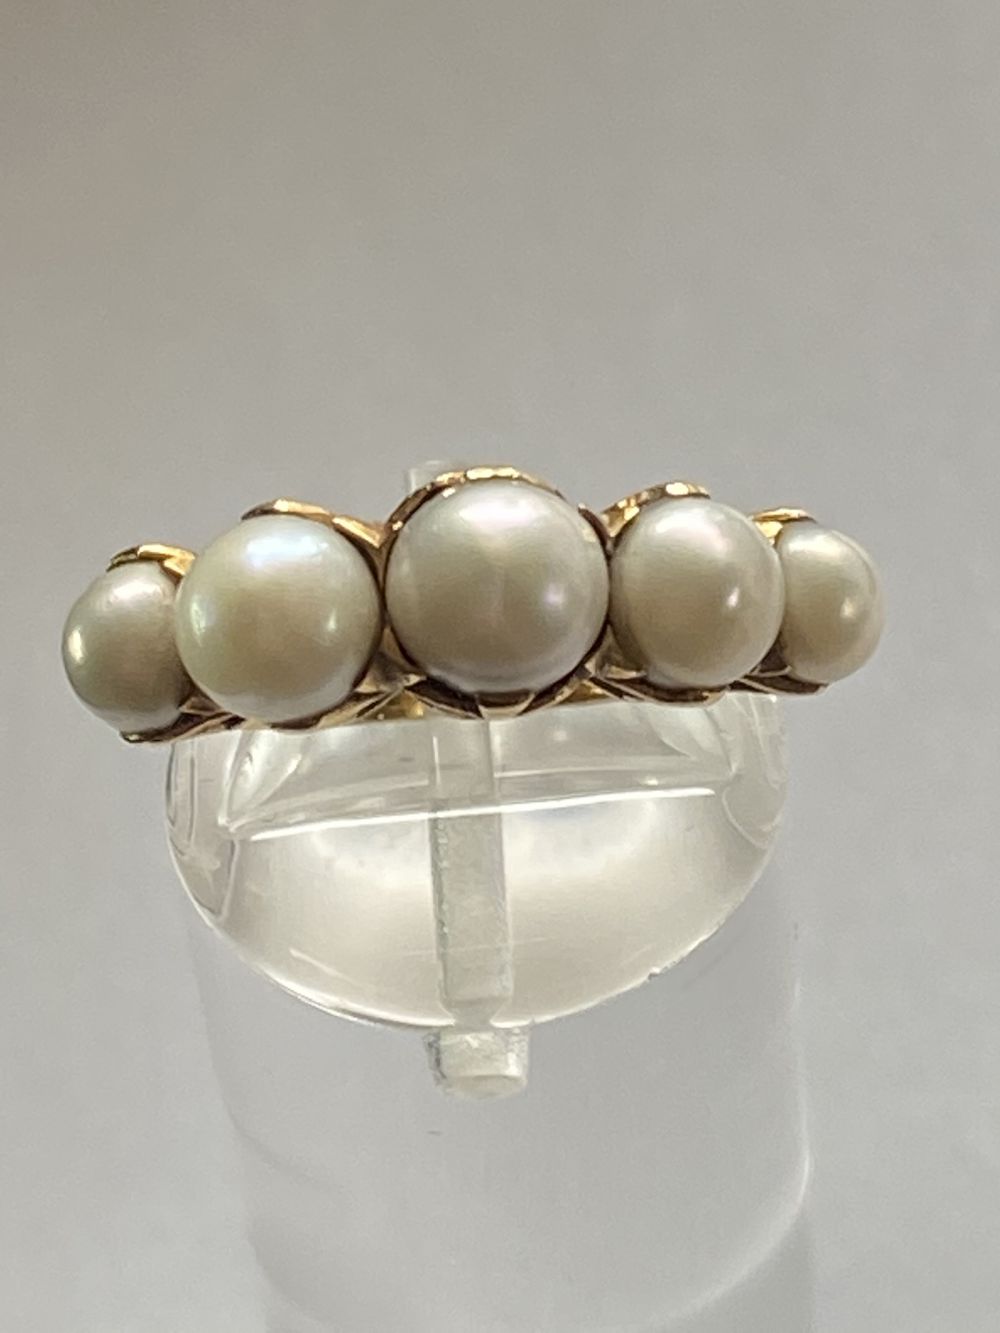 18CT ANTIQUE FIVE STONE GRADUATED PEARL RING - Image 3 of 7